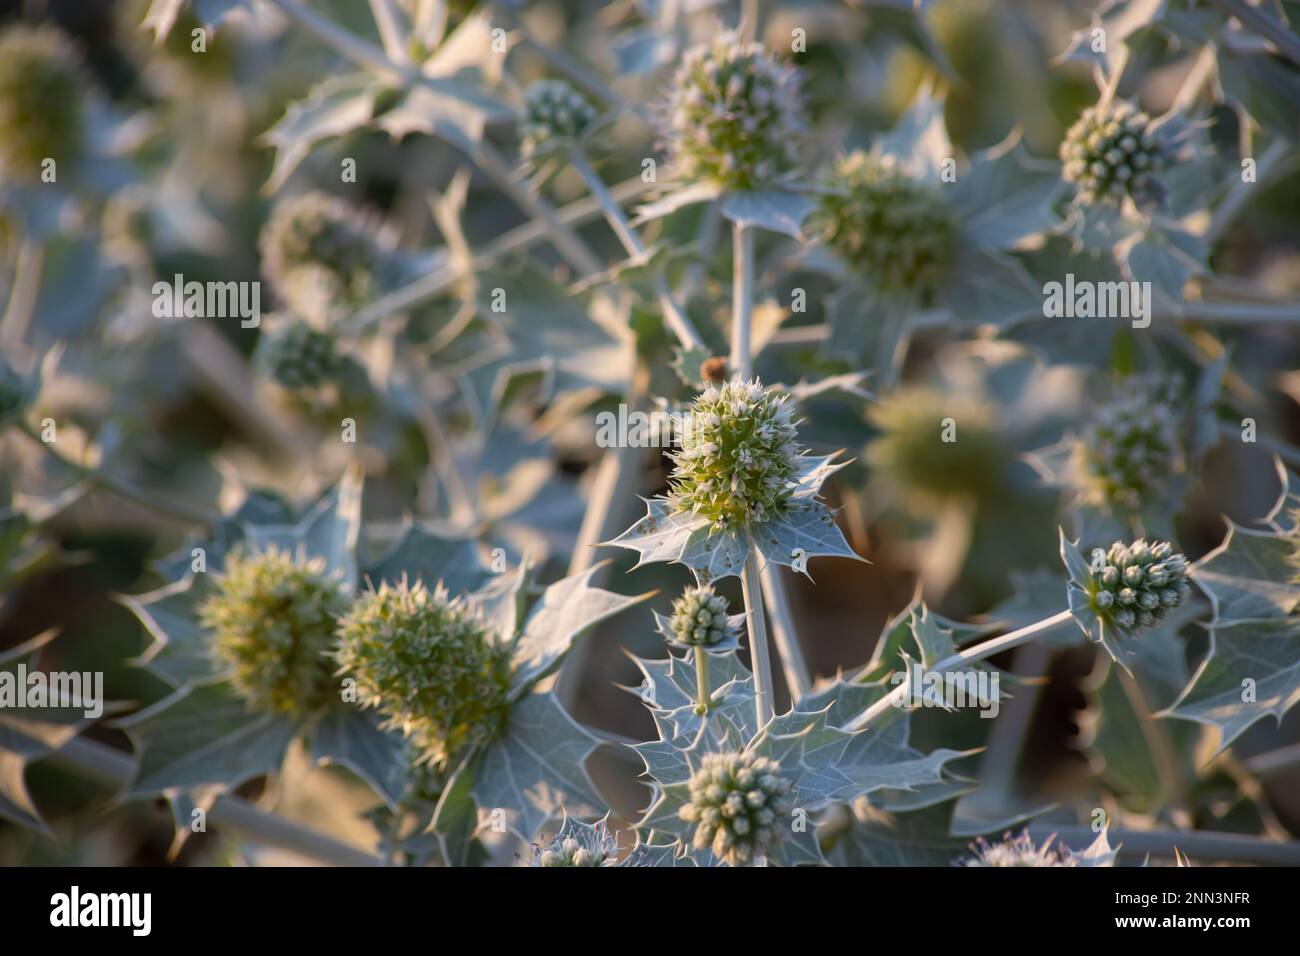 Eryngium maritimum, the sea holly or seaside eryngo. The plant has a very strong and deep root system. Stock Photo